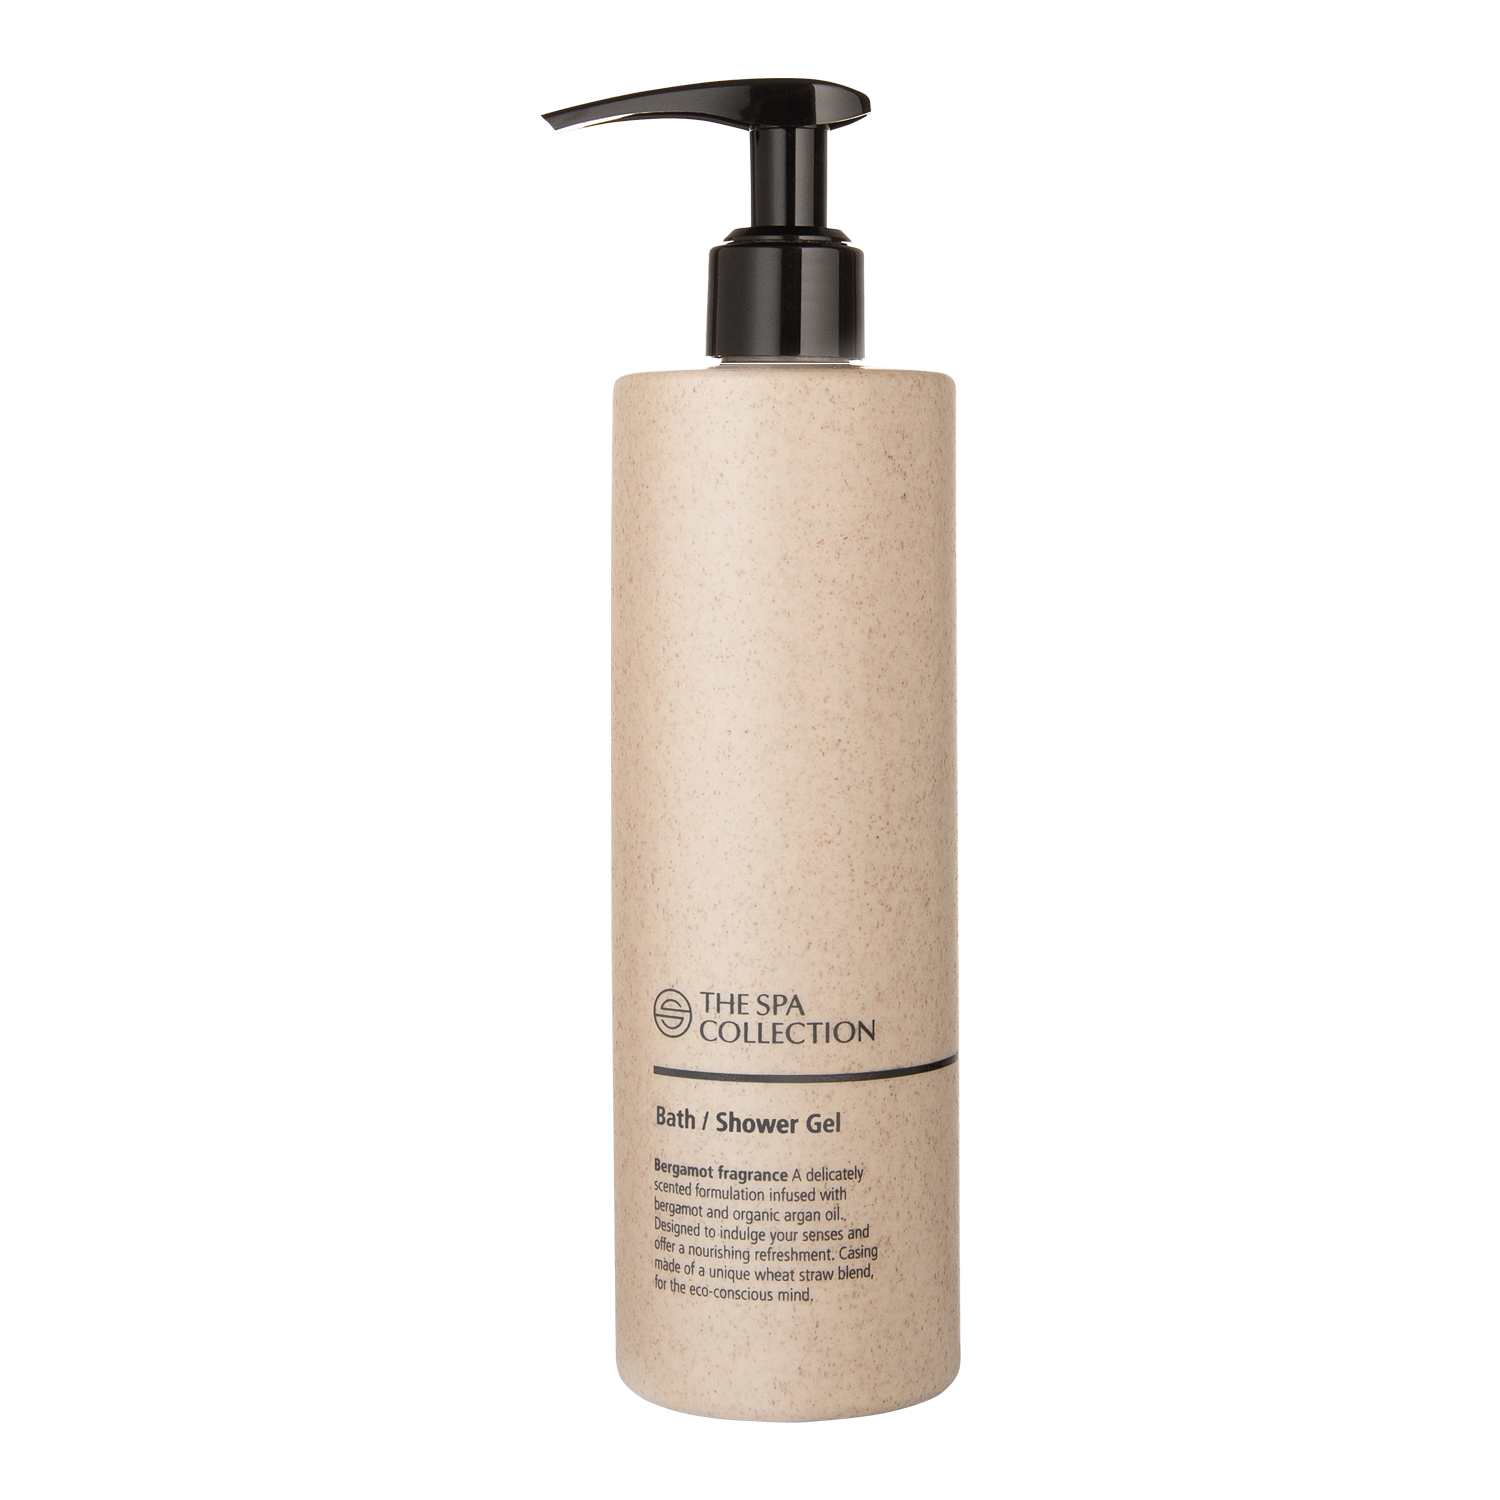 An eco-friendly bodywash with bergamot fragrance by The Spa Collection in a brown, recycled packaging with pump and 400ml.